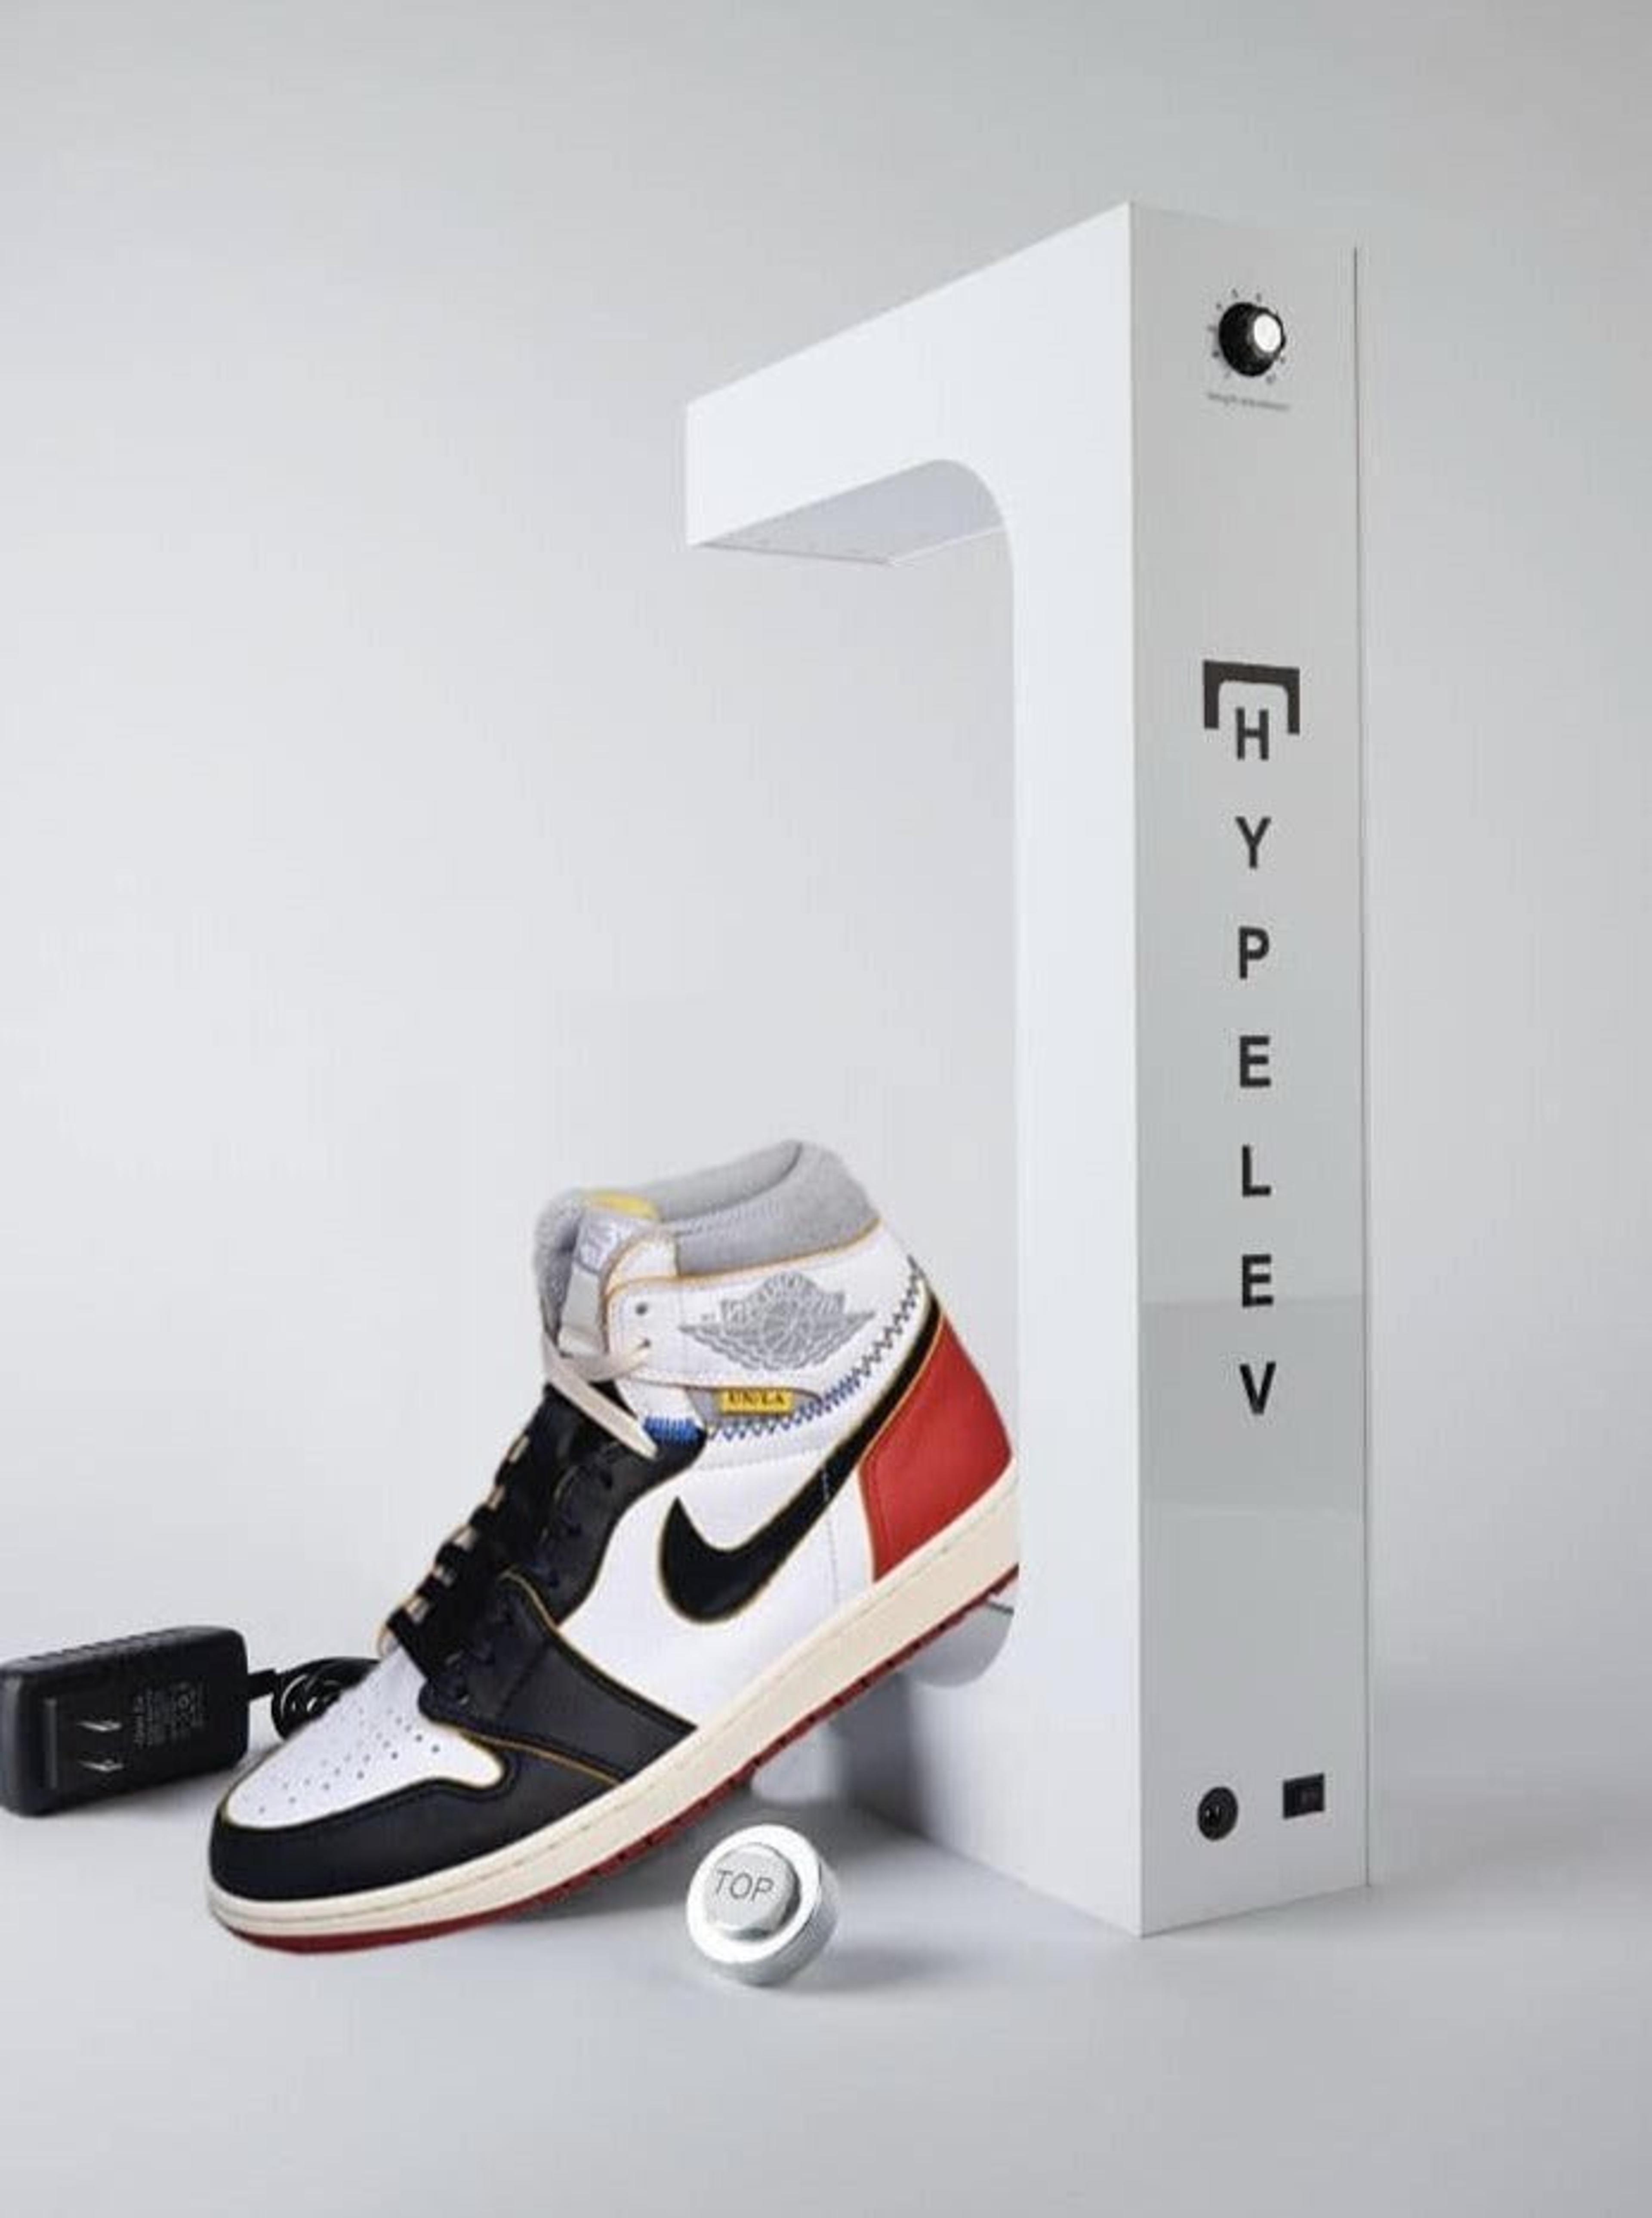 Alternate View 8 of Hypelev Levitating Sneaker Display Stand